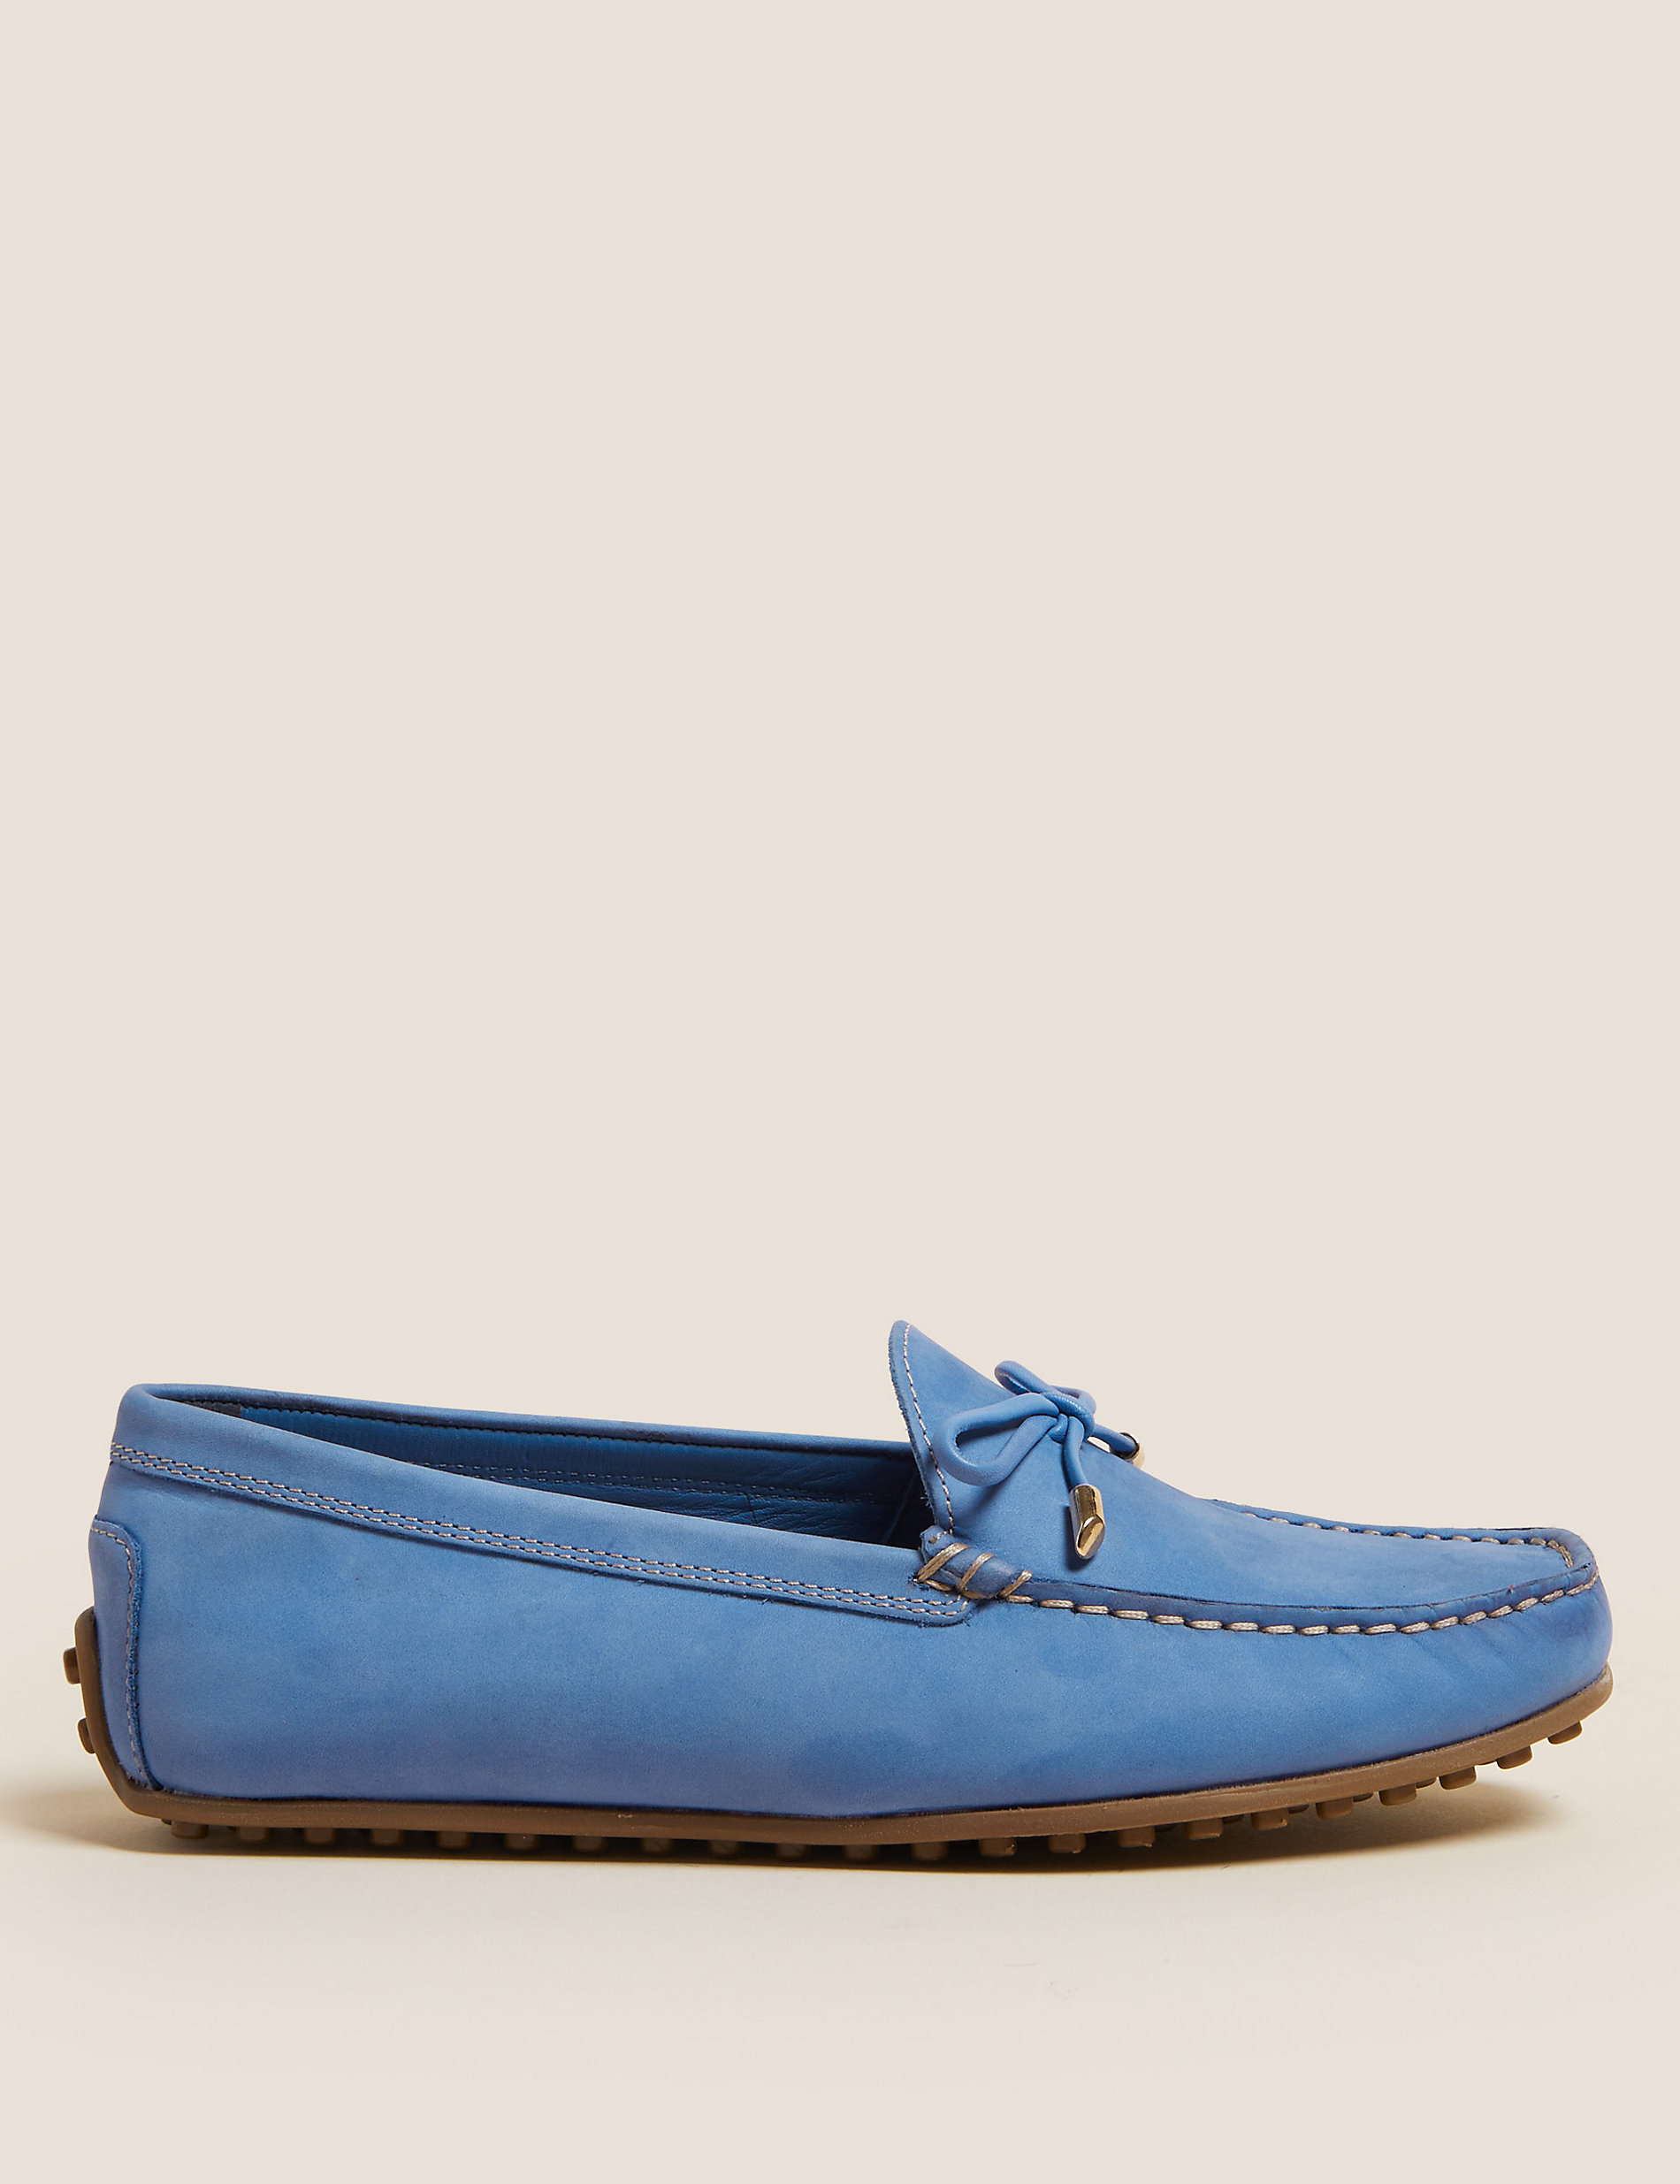 Wide Fit Leather Bow Boat Shoes